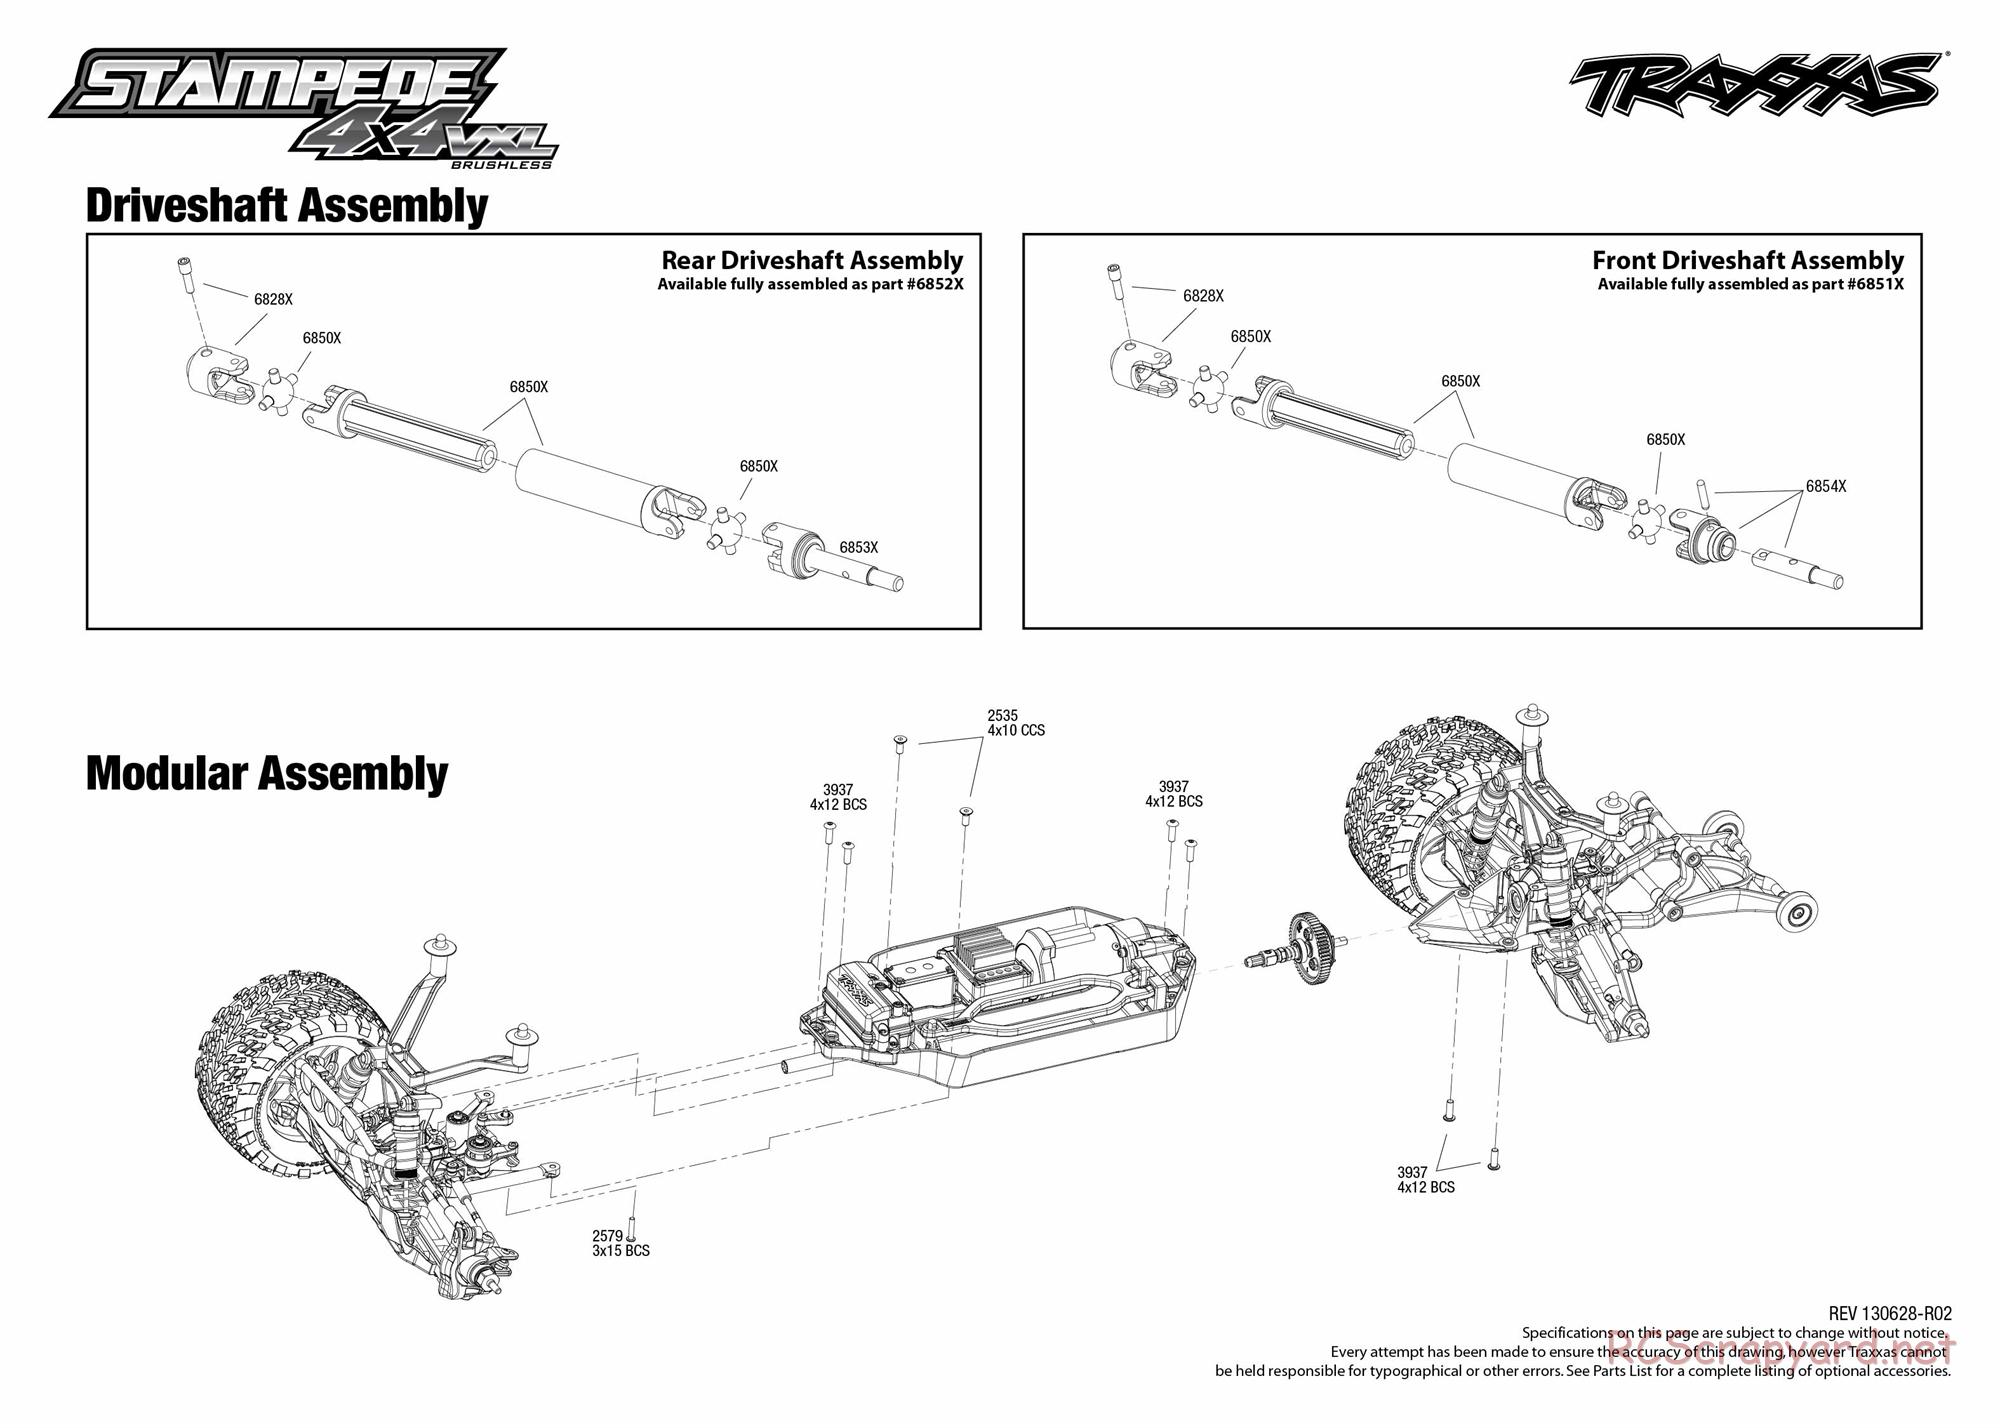 Traxxas - Stampede 4x4 VXL (2012) - Exploded Views - Page 2